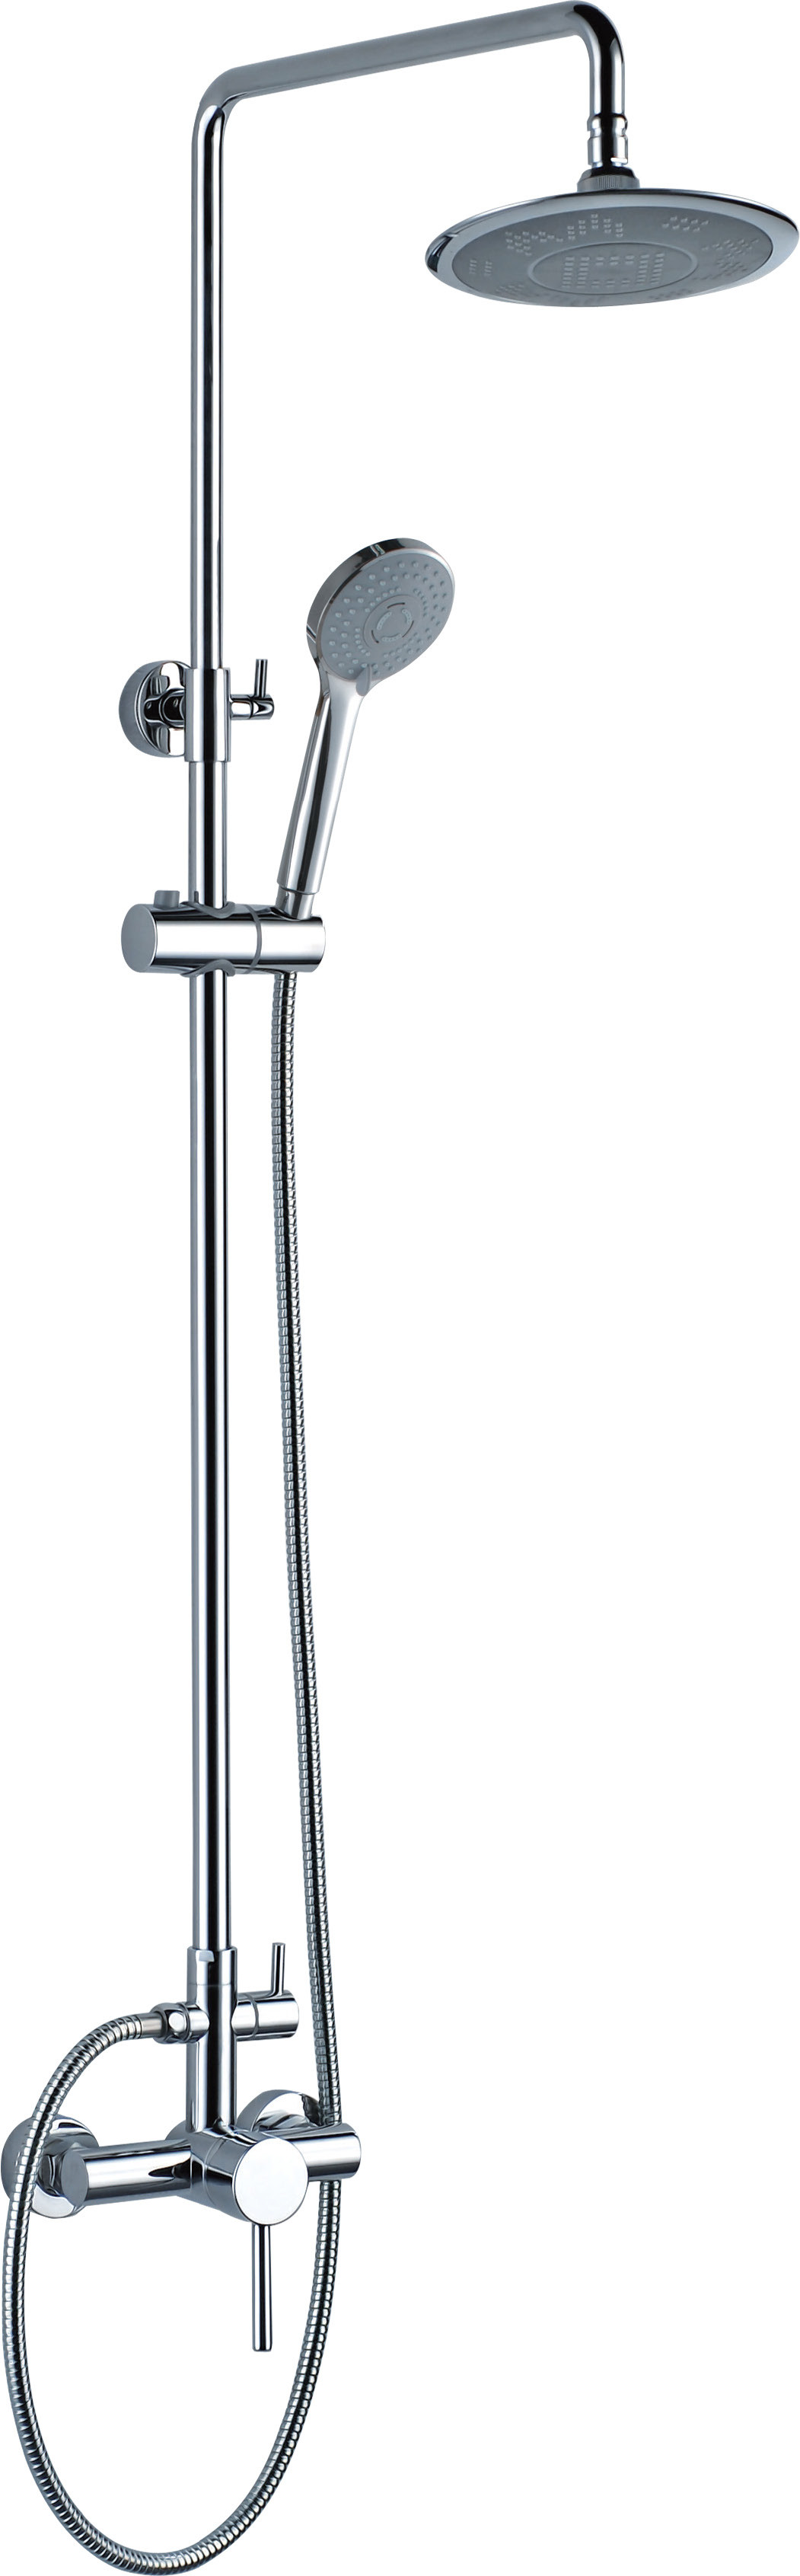  Ceramic Brass Bathroom Faucet with 8 inch ABS Head Shower Manufactures